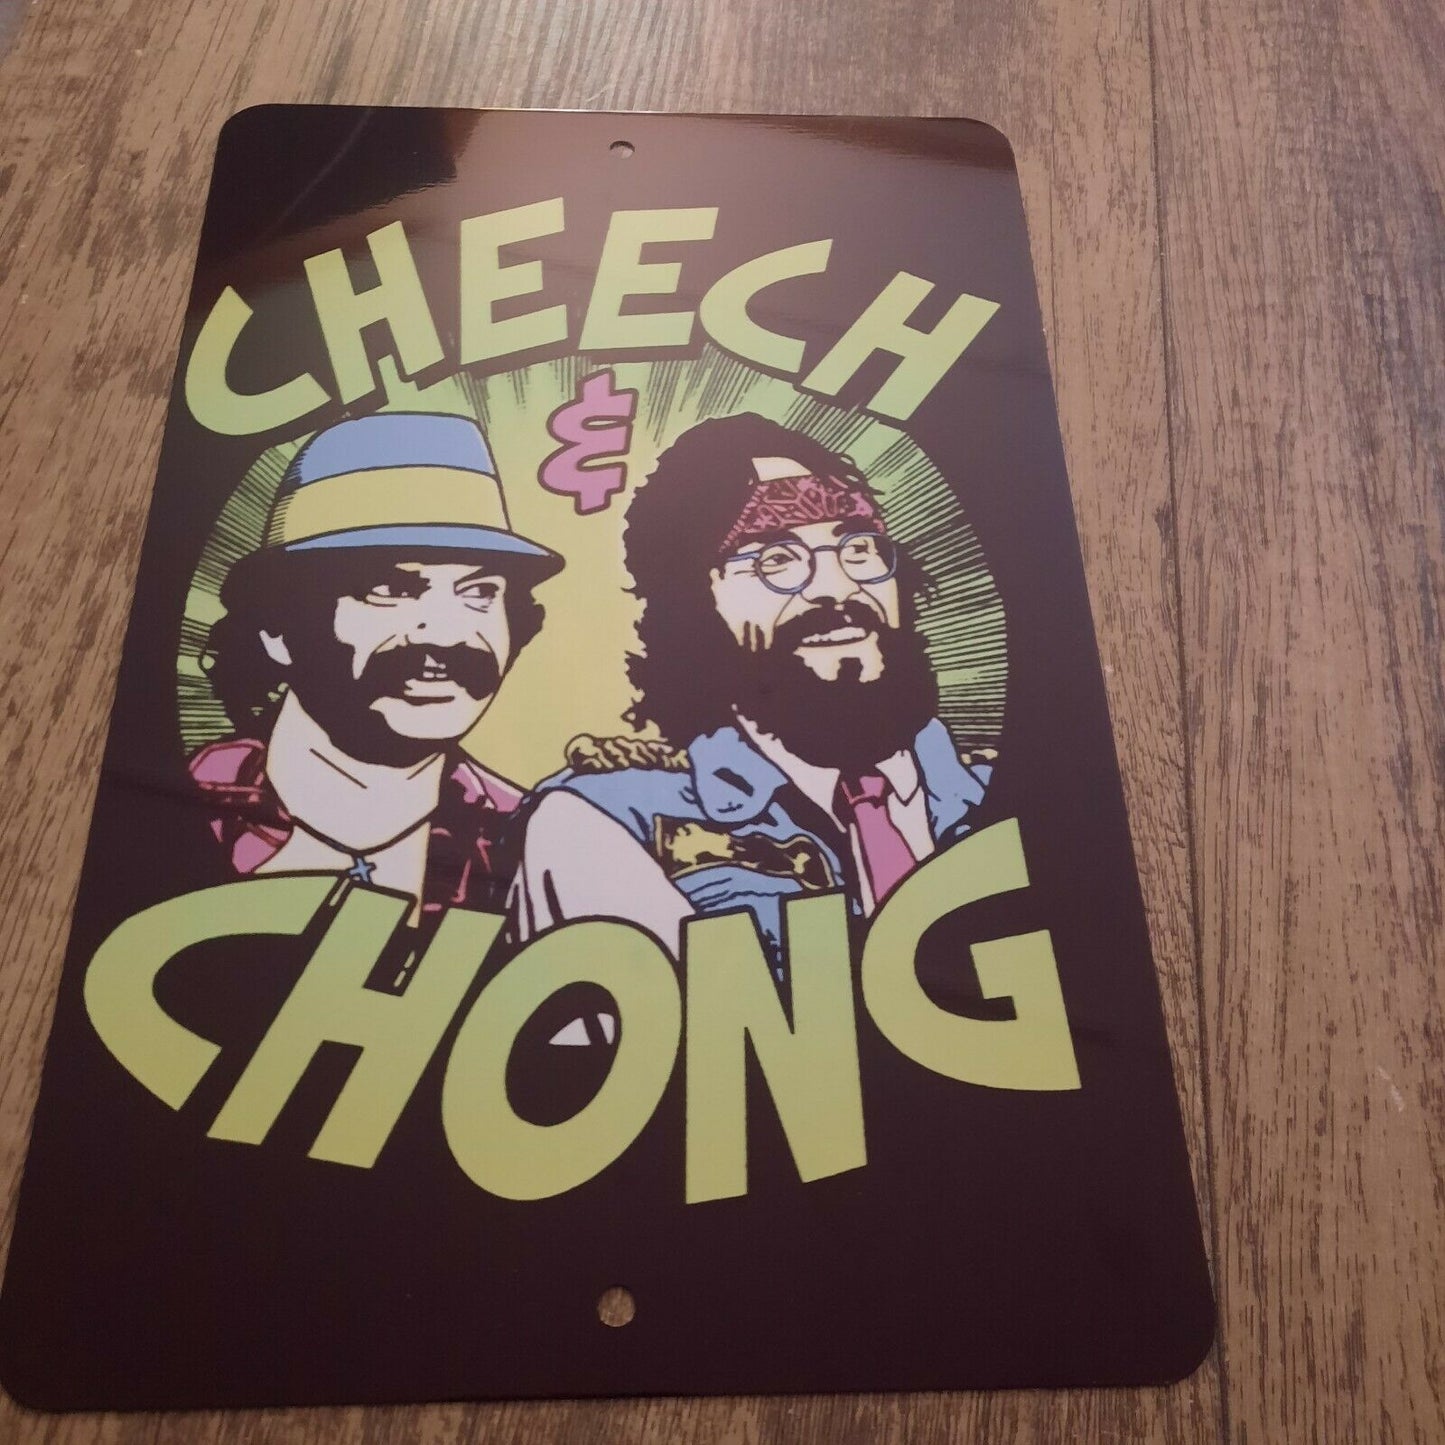 Cheech and Chong 420 Weed Mary Jane Poster Style 8x12 Metal Wall Sign Comedy Movie Poster